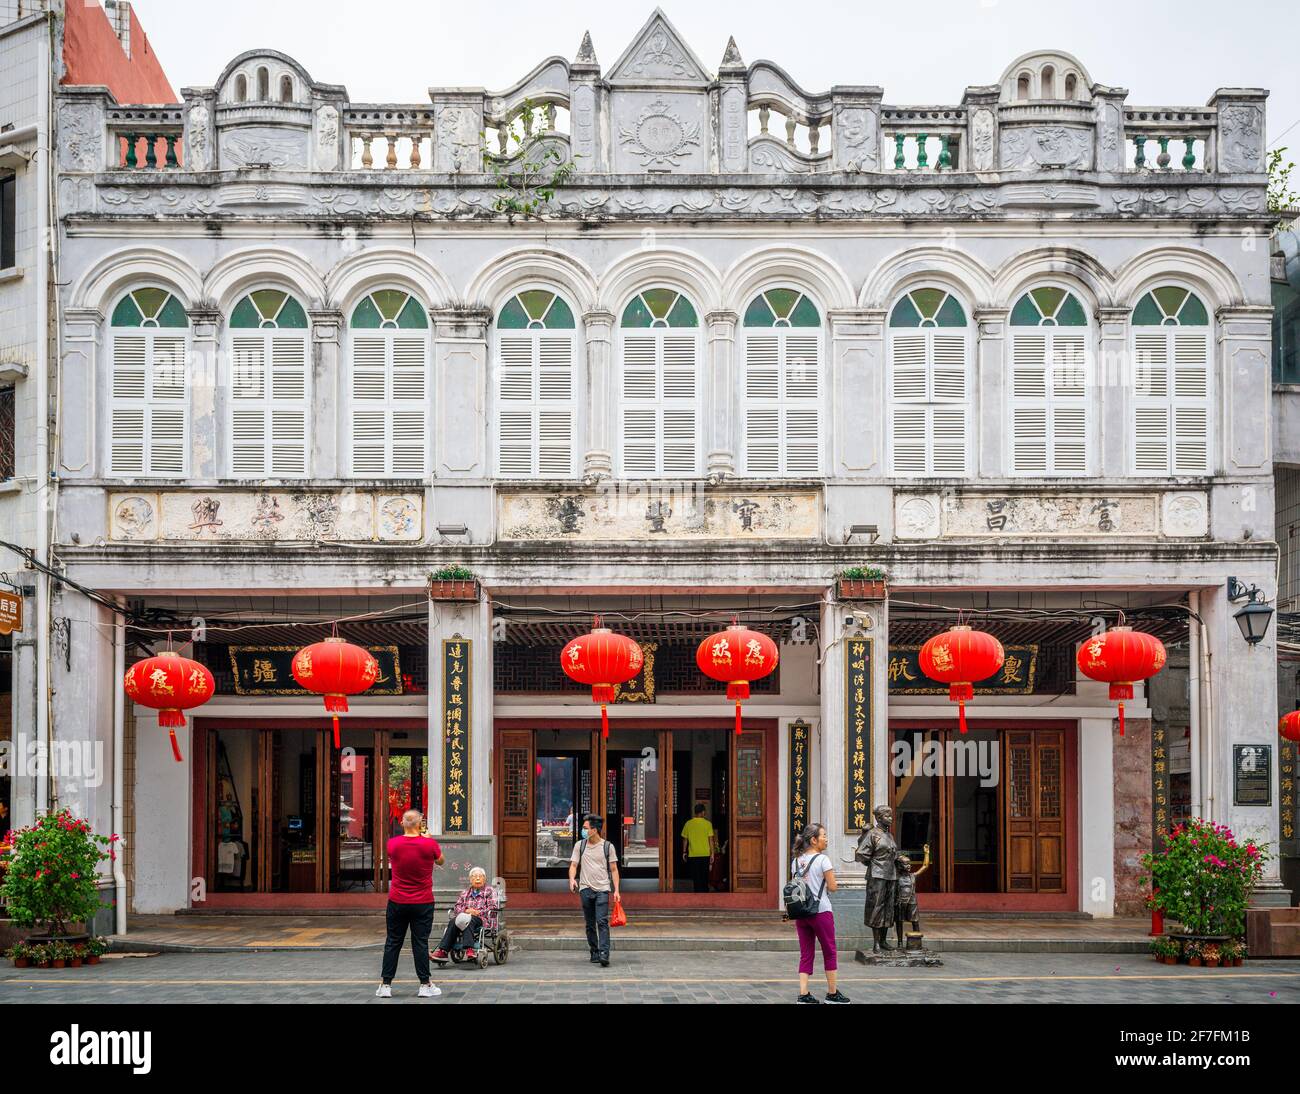 Haikou China , 21 March 2021 : Front entrance view of Haikou Tianhou or Mazu temple inside an old colonial arcade house building in Qilou old street H Stock Photo